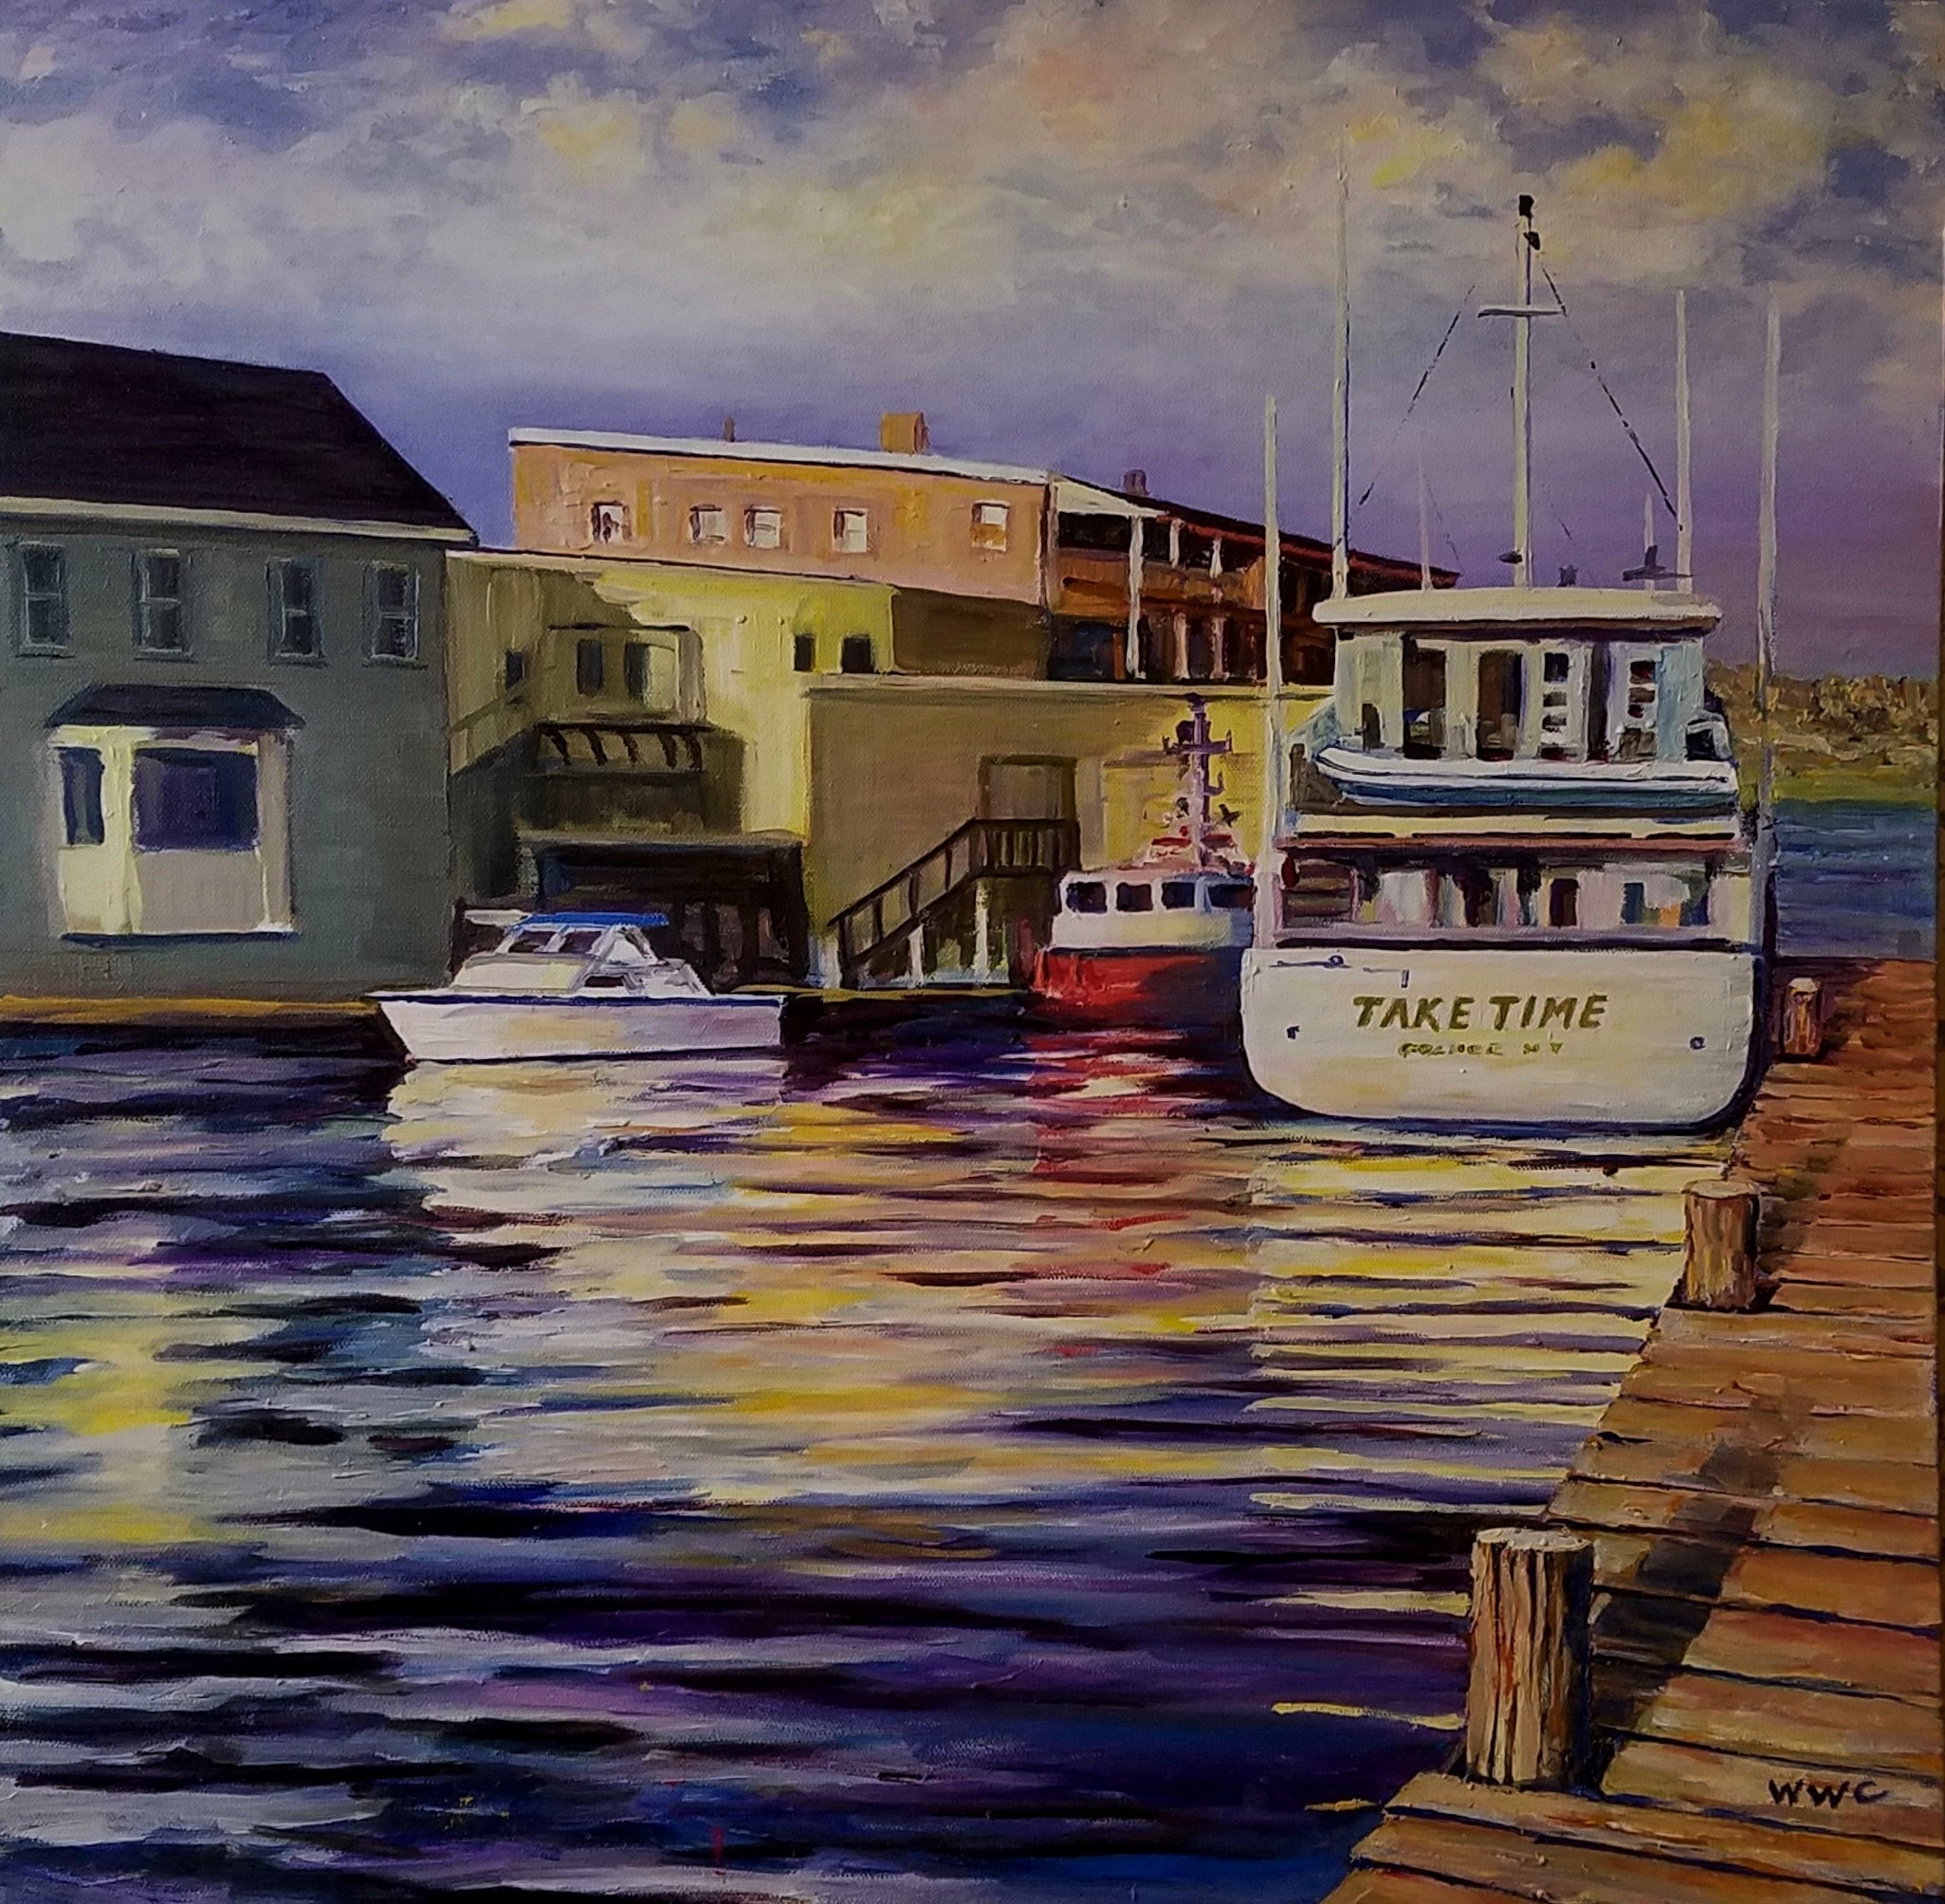 William Christopherson: 'dawn at clayton docks', 2019 Oil Painting, Landscape. A sunrise scene in the Thousand Islands of Upstate NY.  Remindfull of those important slower days to relax and enjoy the beauty of the earth.  Completed in Grumbacher oils, in hardwood professional floater frame.  Wall ready.  Award winning artwork at 2019 Along the Rivers Edge, TI Arts Center.  Ships UPS, ...